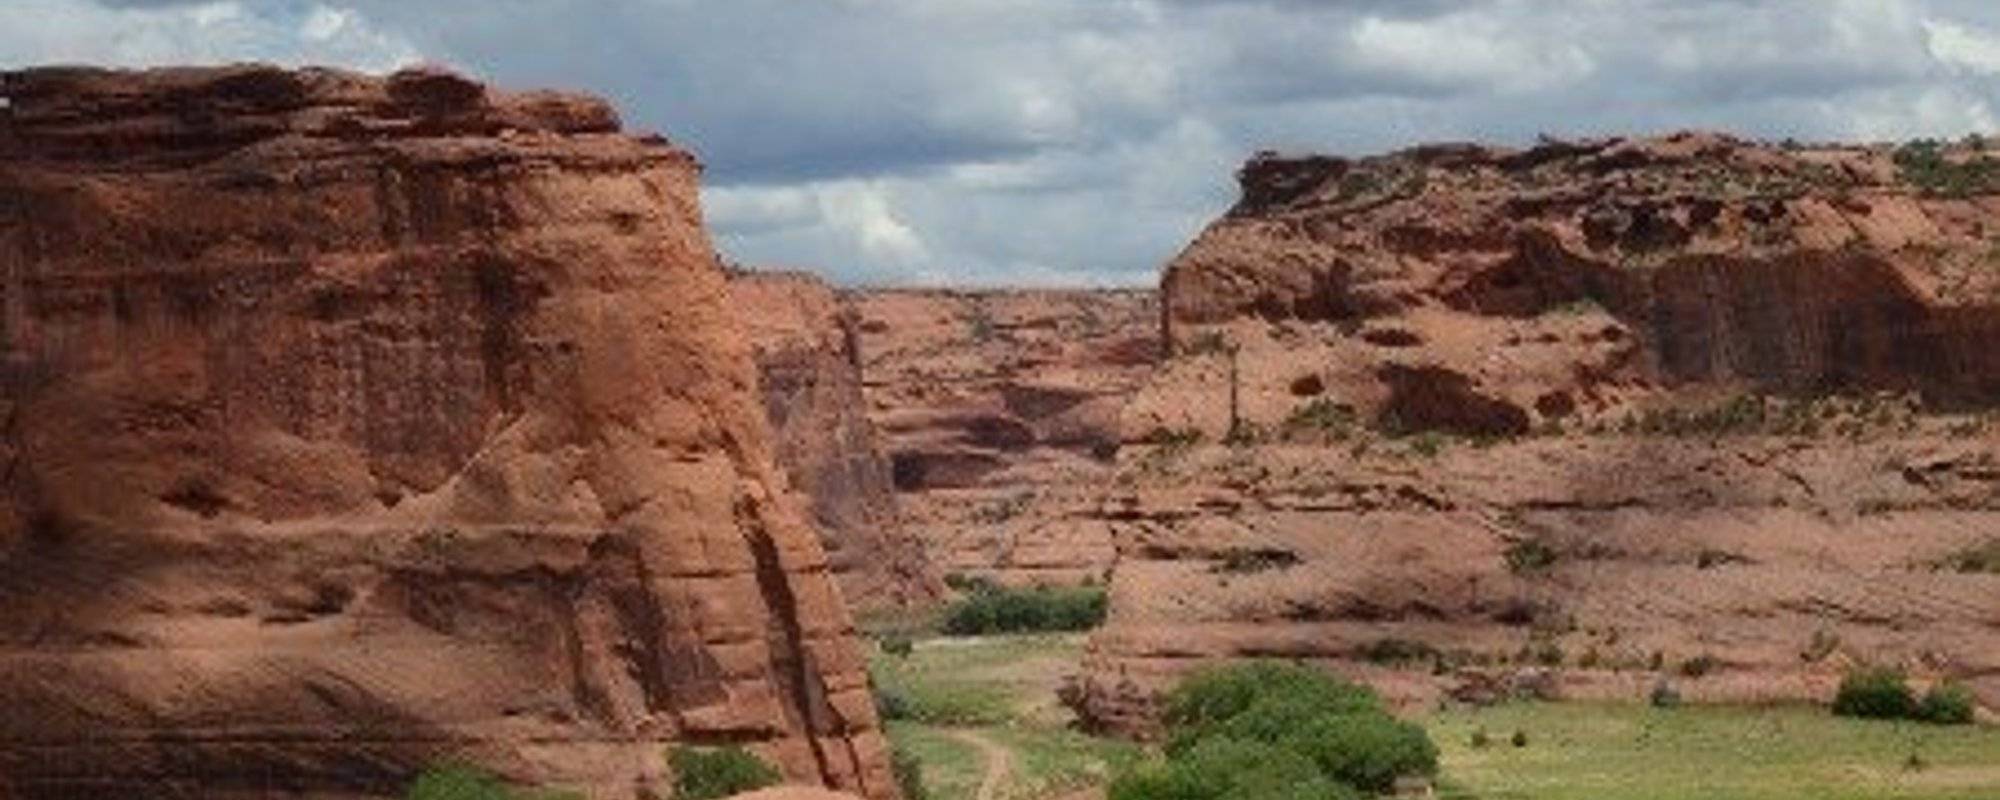 R2R Travelogue 2: Navajo Nation and Canyon de Chelly